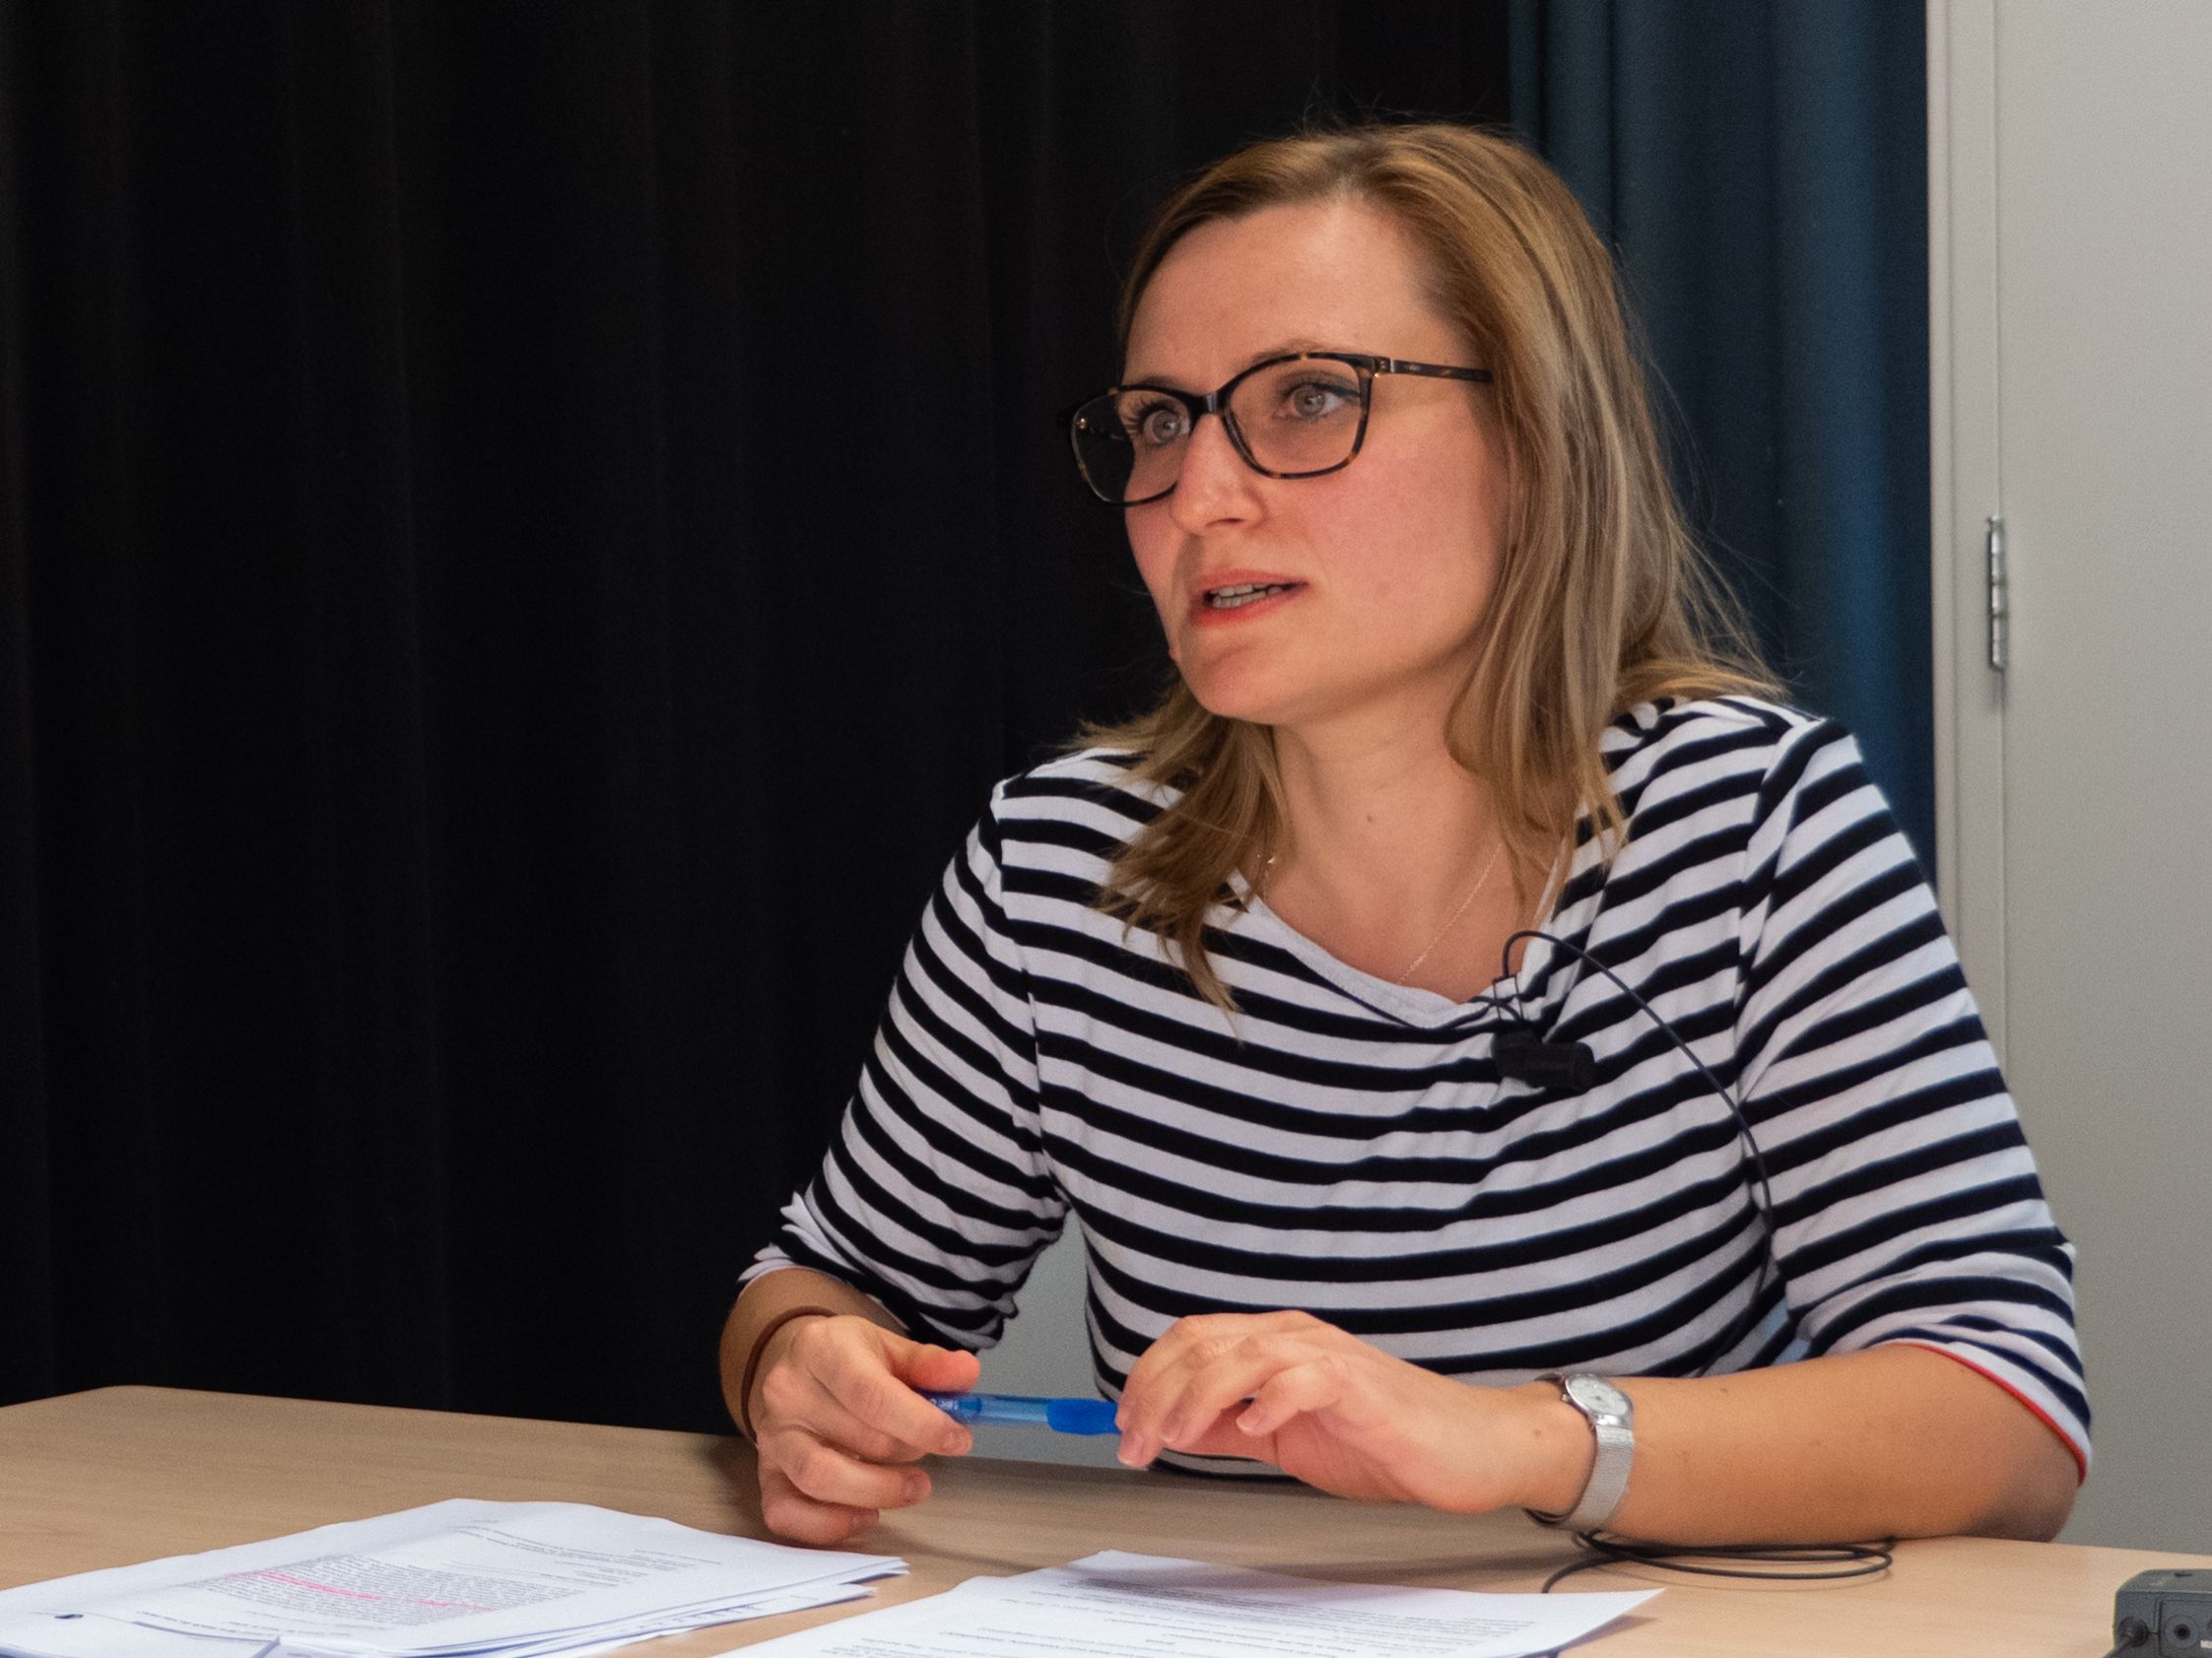 Milena Nikolva is assistant professor at the Faculty of Economics and Business of the University of Groningen